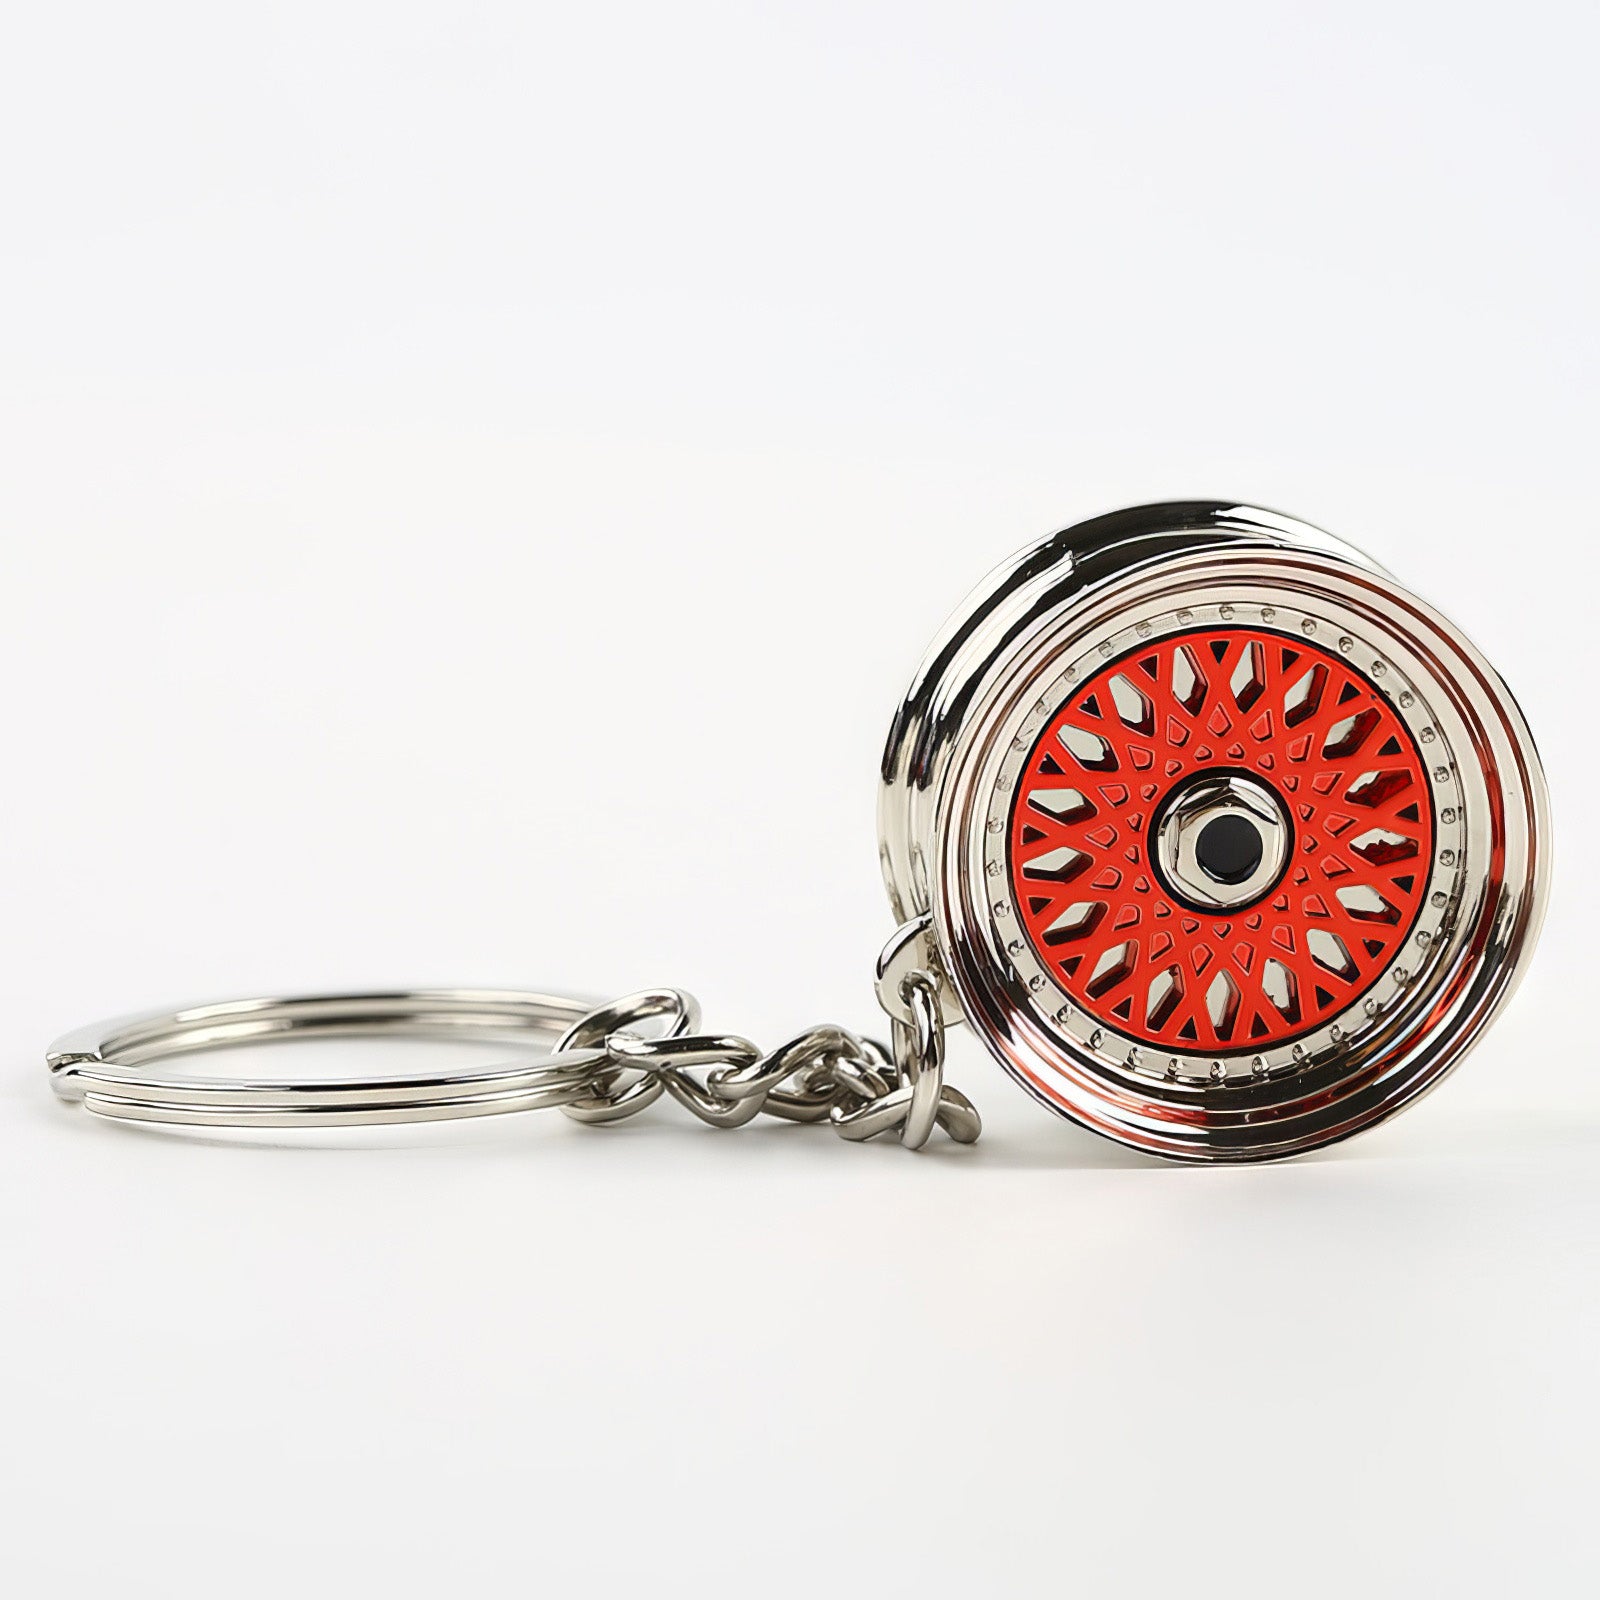 BBS Mesh Wheel keychain with red center.